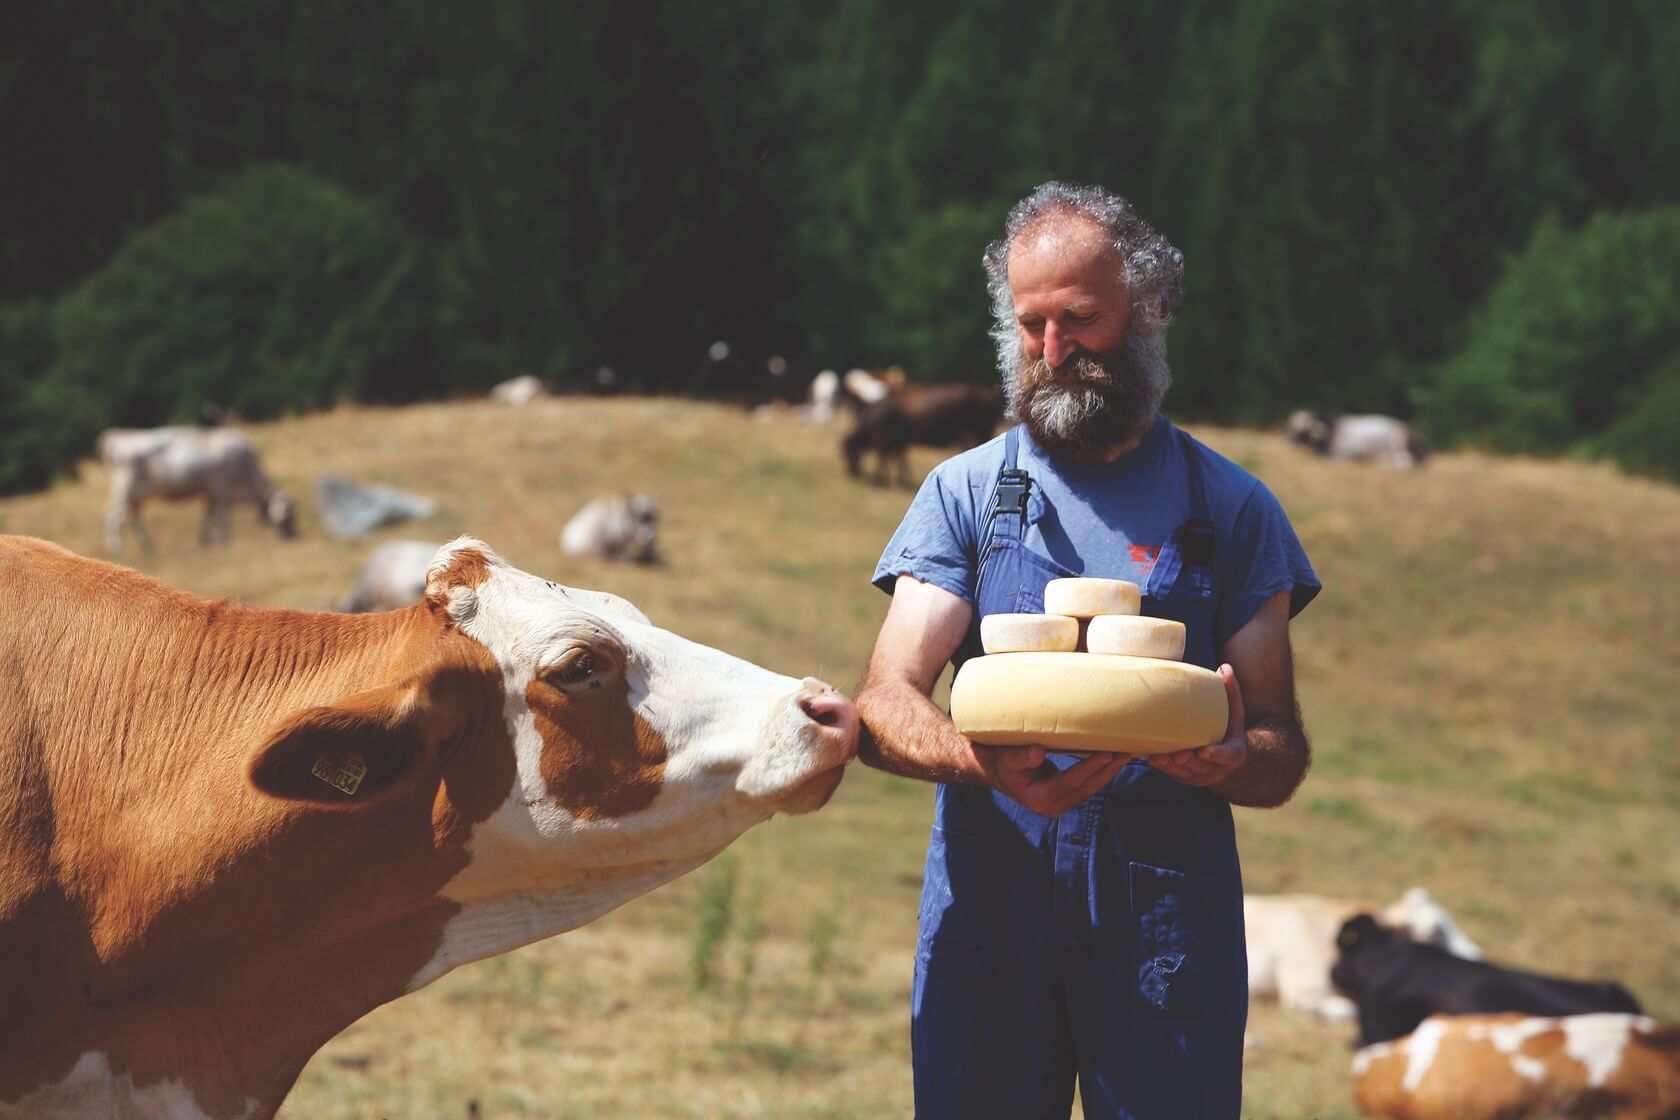 A man walks around with cheese near some grazing cows in the French Riviera